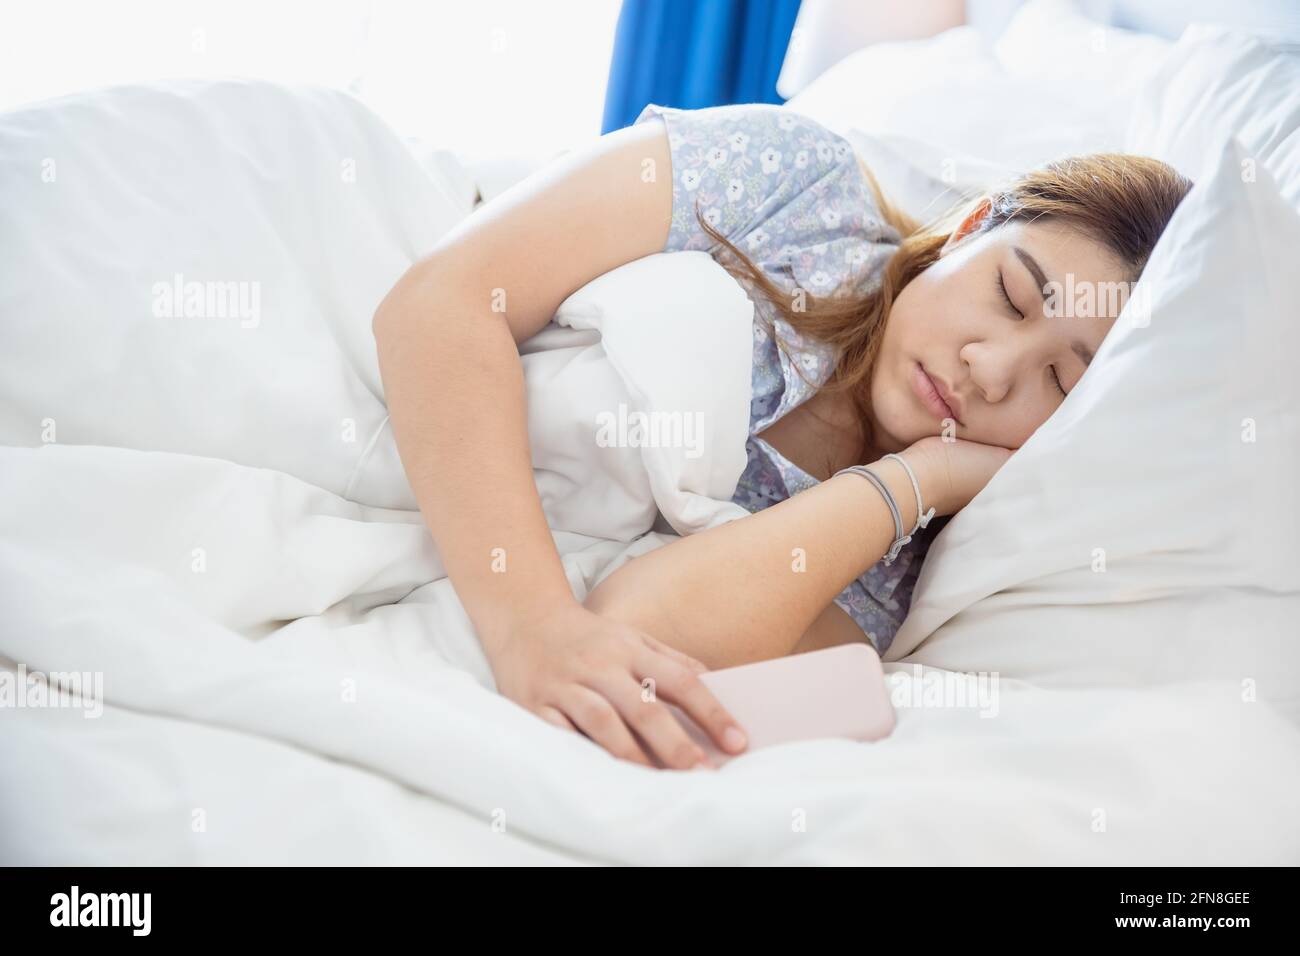 women sleeping in cozy white bed, Asian chubby young fat girl rest with cellphone. Stock Photo